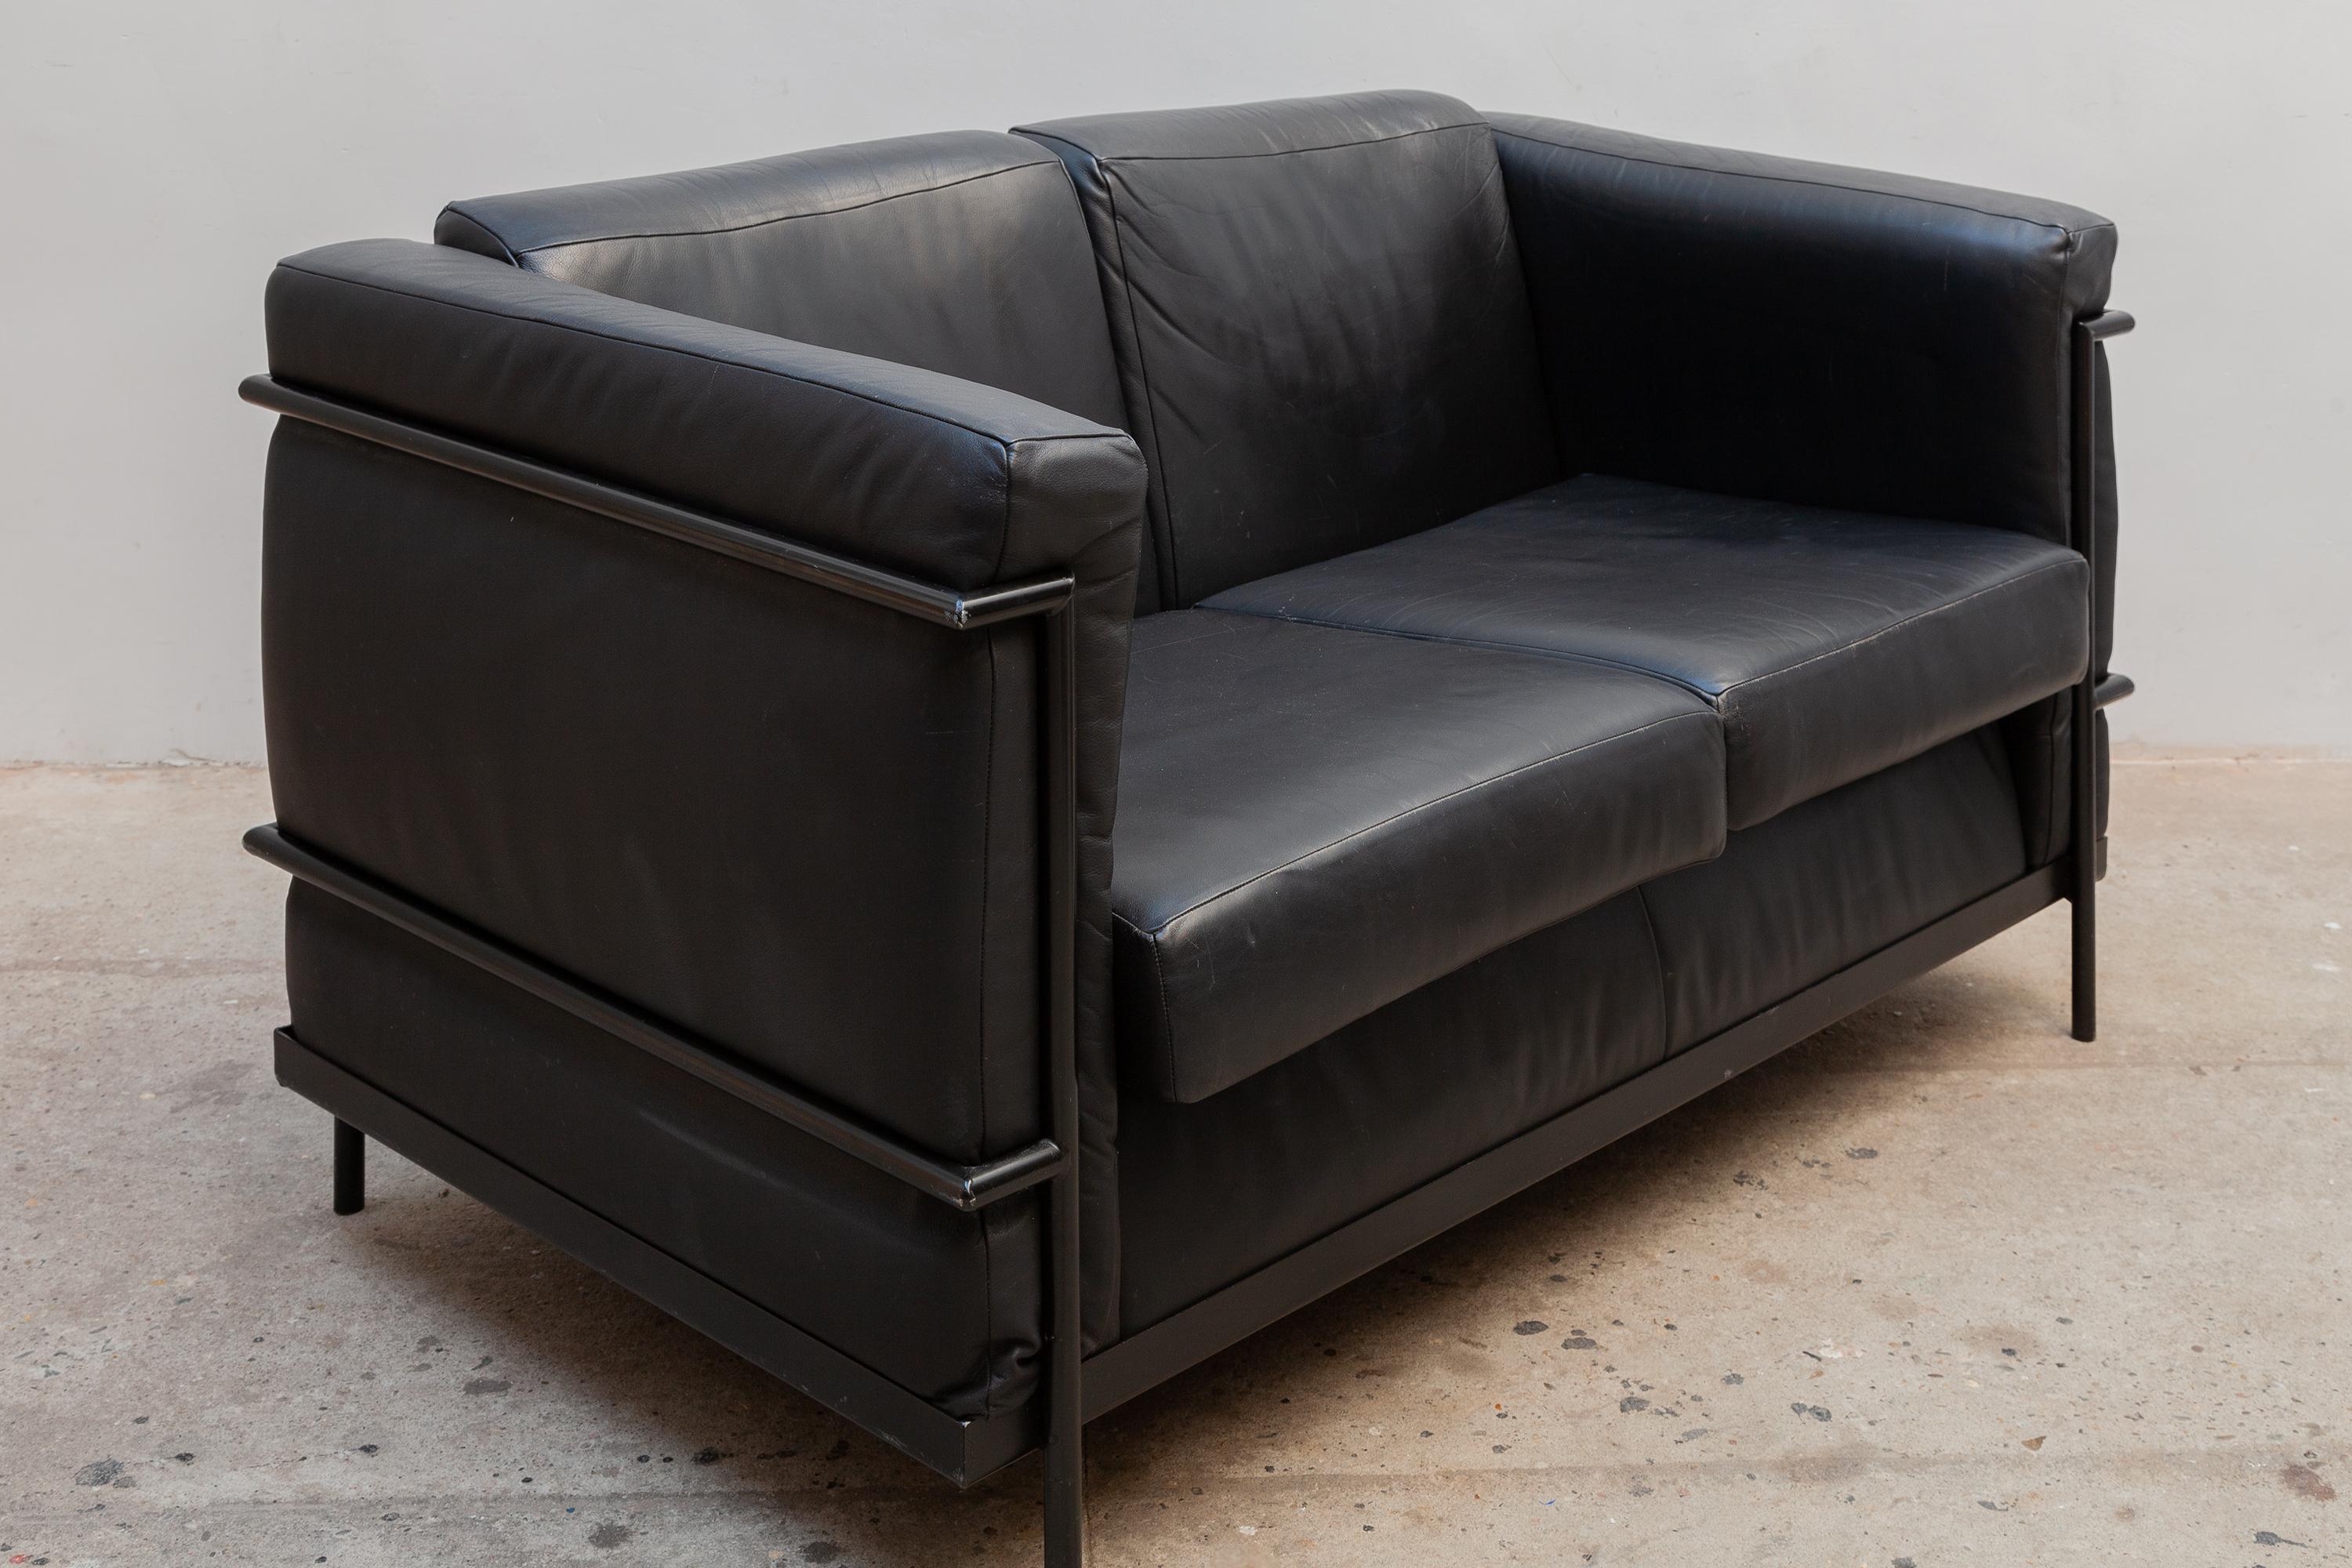 Original Harvink sofa inspired by Le Corbusier LC2. Black metal tube frame with black leather upholstery in loose cushions for a cozy seat. Dimensions: 140 W x 76 H x 80 D cm seat 45cm high.